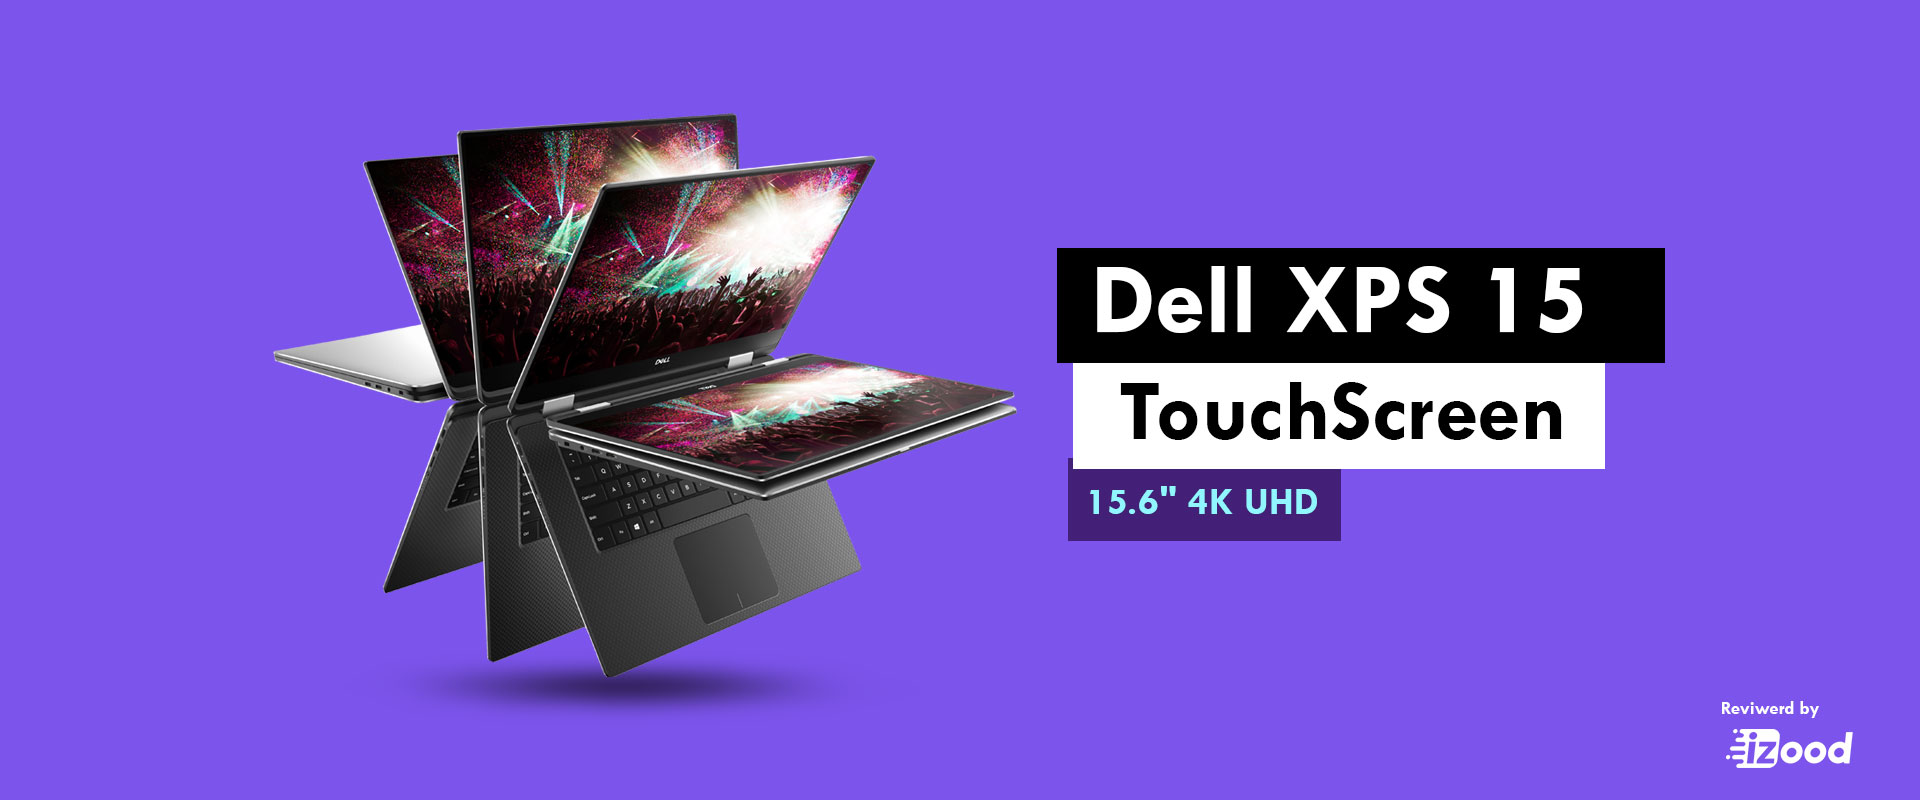 Dell XPS 15 touch screen: Is it worth buying?